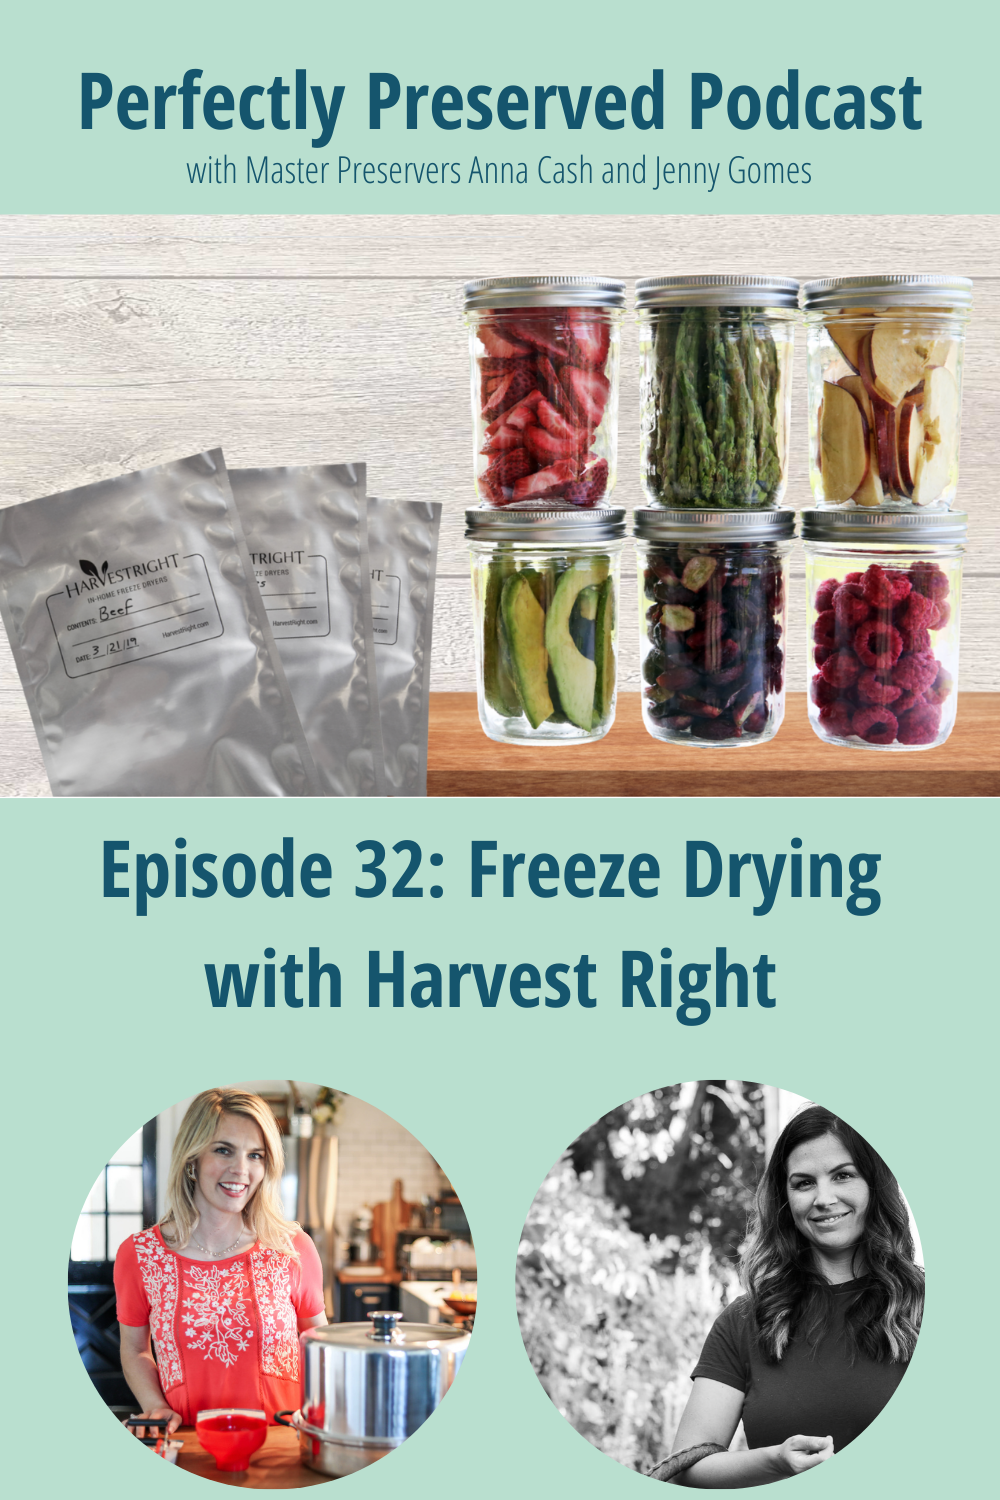 https://thedomesticwildflower.com/wp-content/uploads/2023/03/Perfectly-Preserved-Podcast-Pinterest-Image-Freeze-Drying-.png